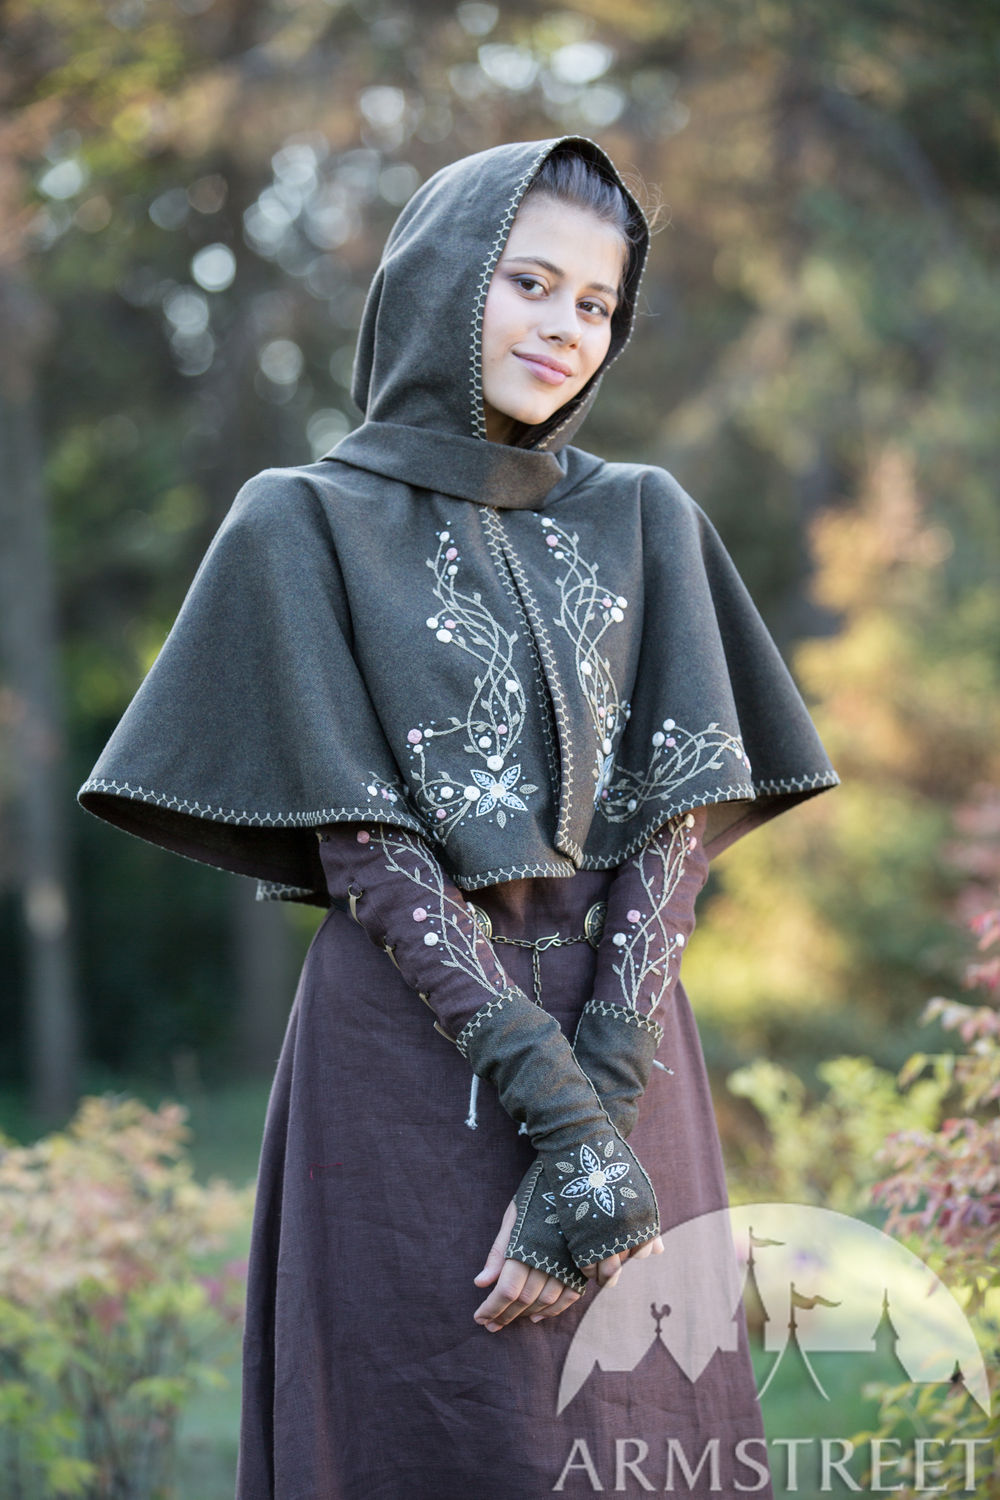 Limited Edition “Fairy Tale” Brown Woolen Hood and Mittens